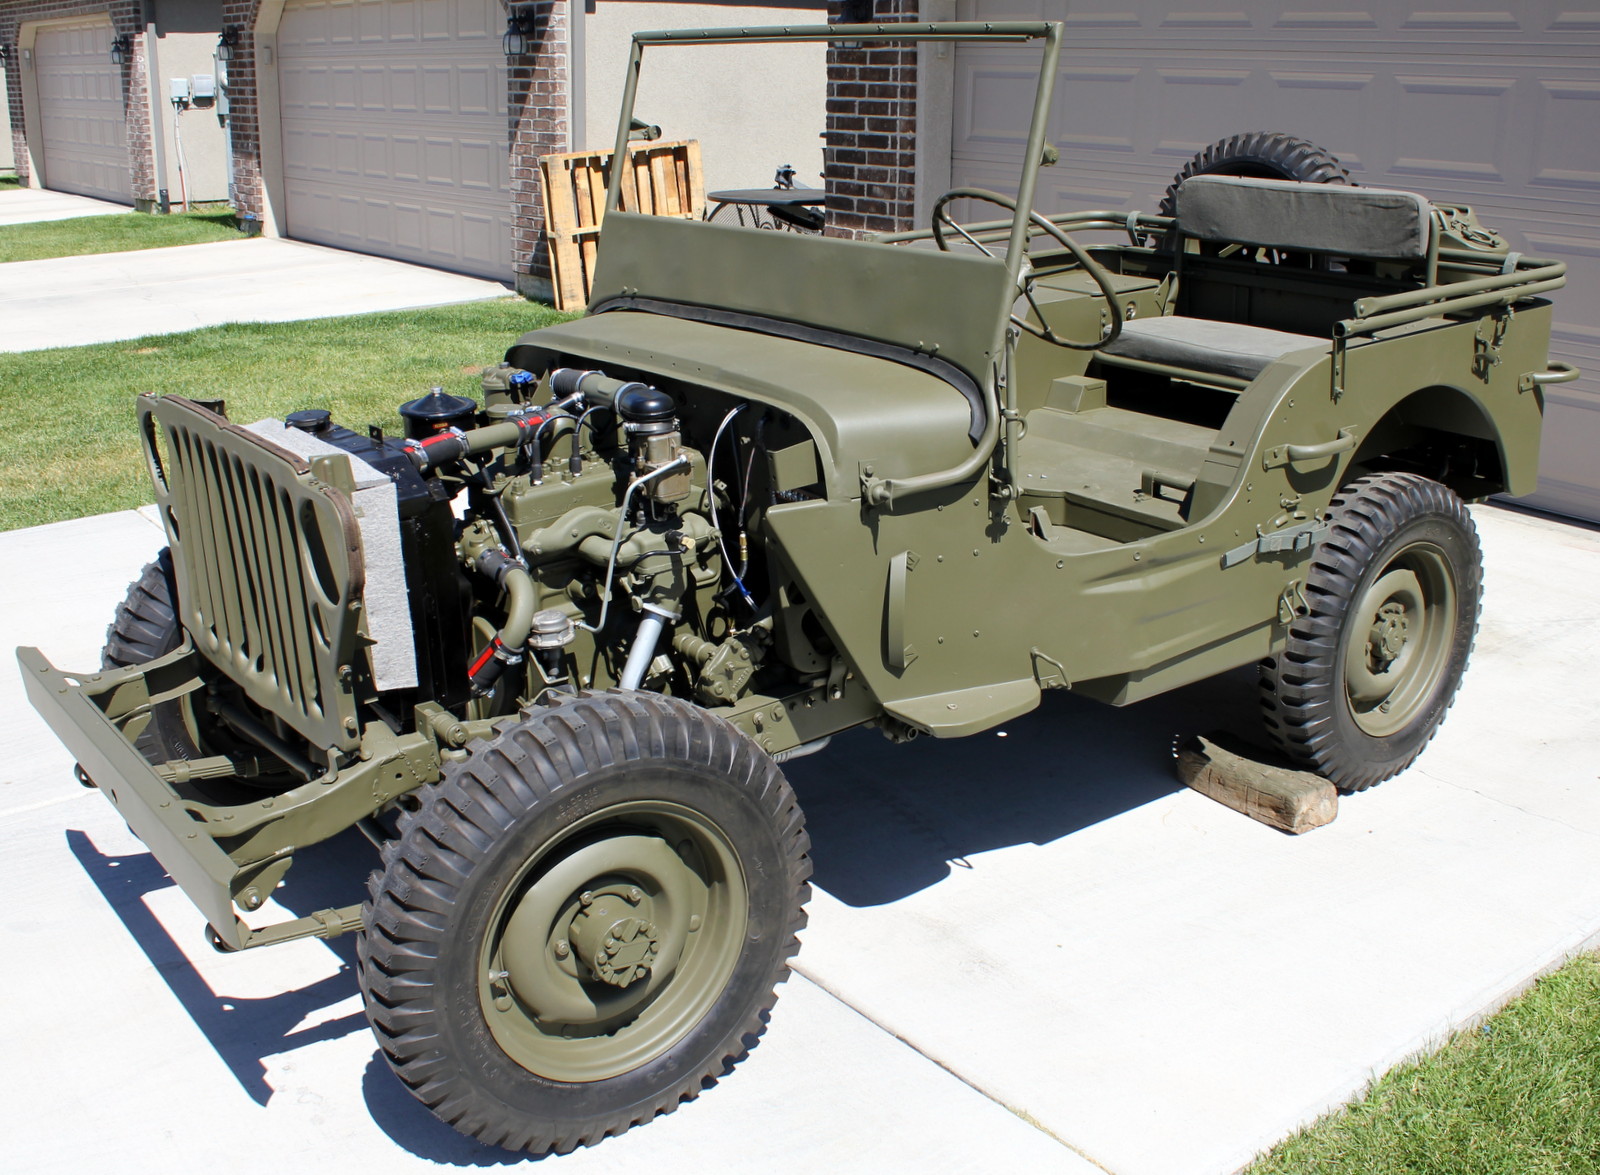 1943 Willys MB Jeep Restoration Project June 2013